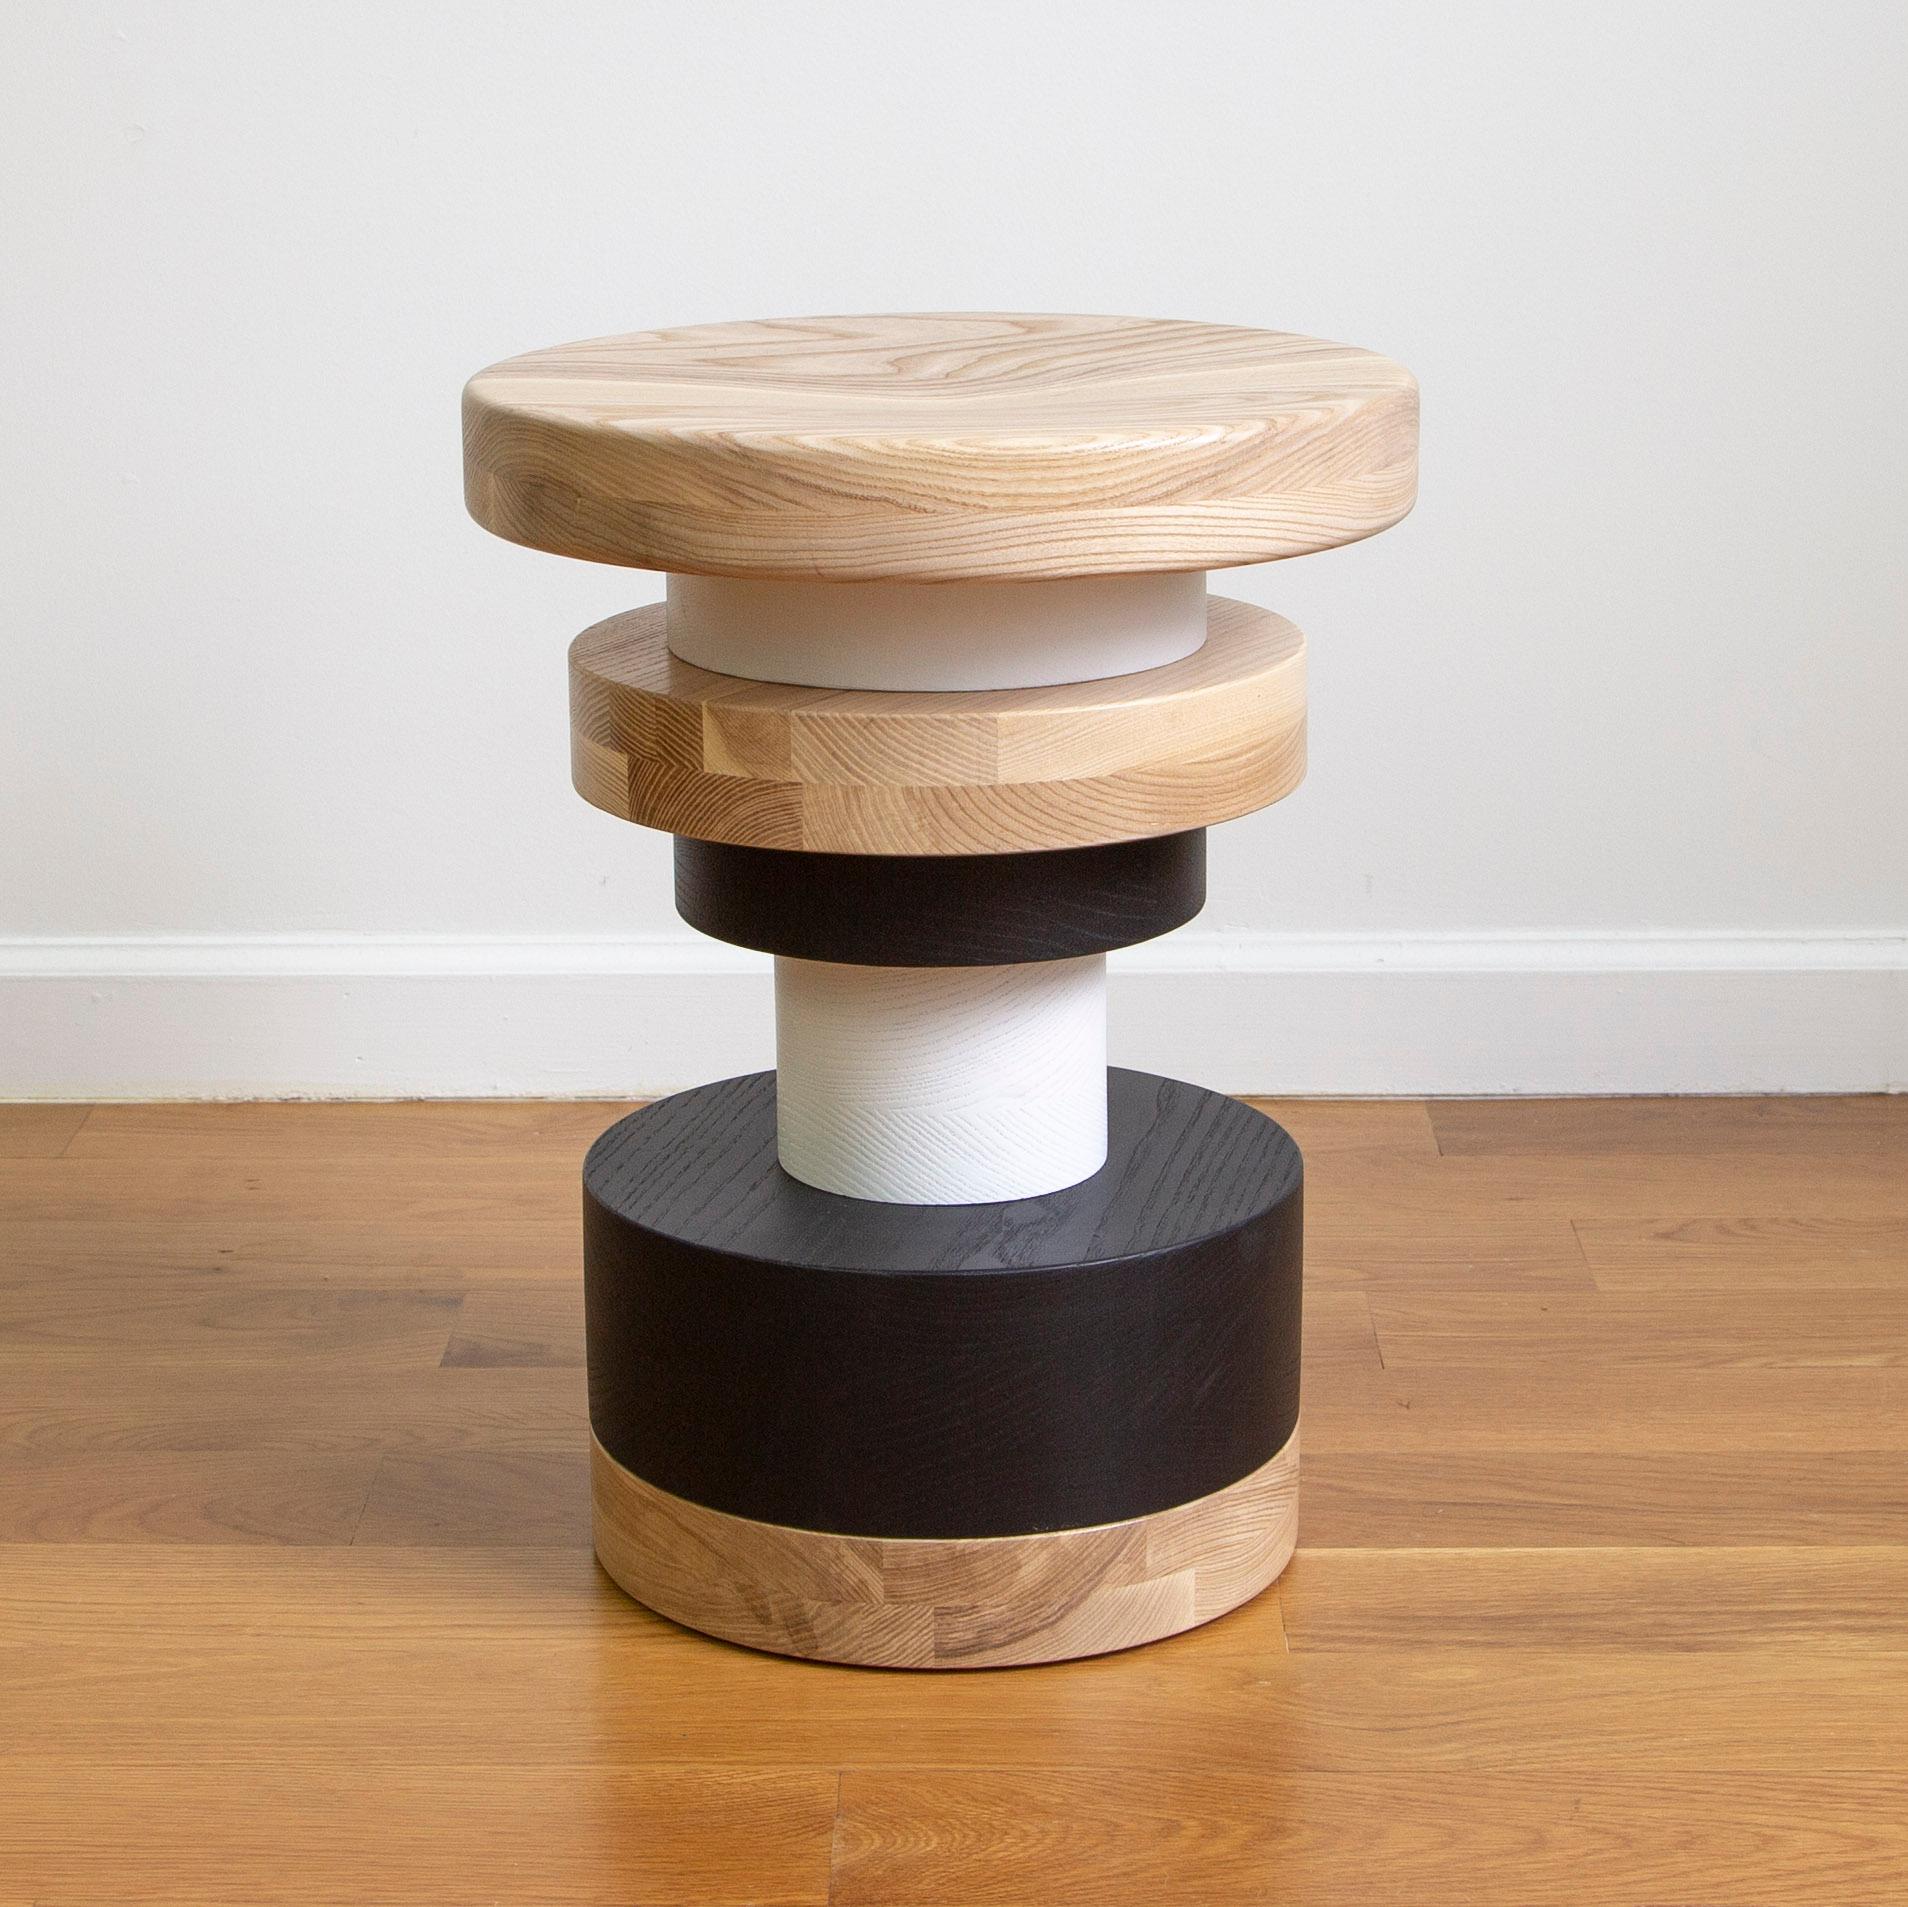 This listing is for 2 sass stool from Souda. We offer three different shapes (A, B, & C). This listing is for 'A' and 'B', which are shown in the first image. 

The Sottsass inspired “Sass Stools” are simple, sculptural accents for any interior